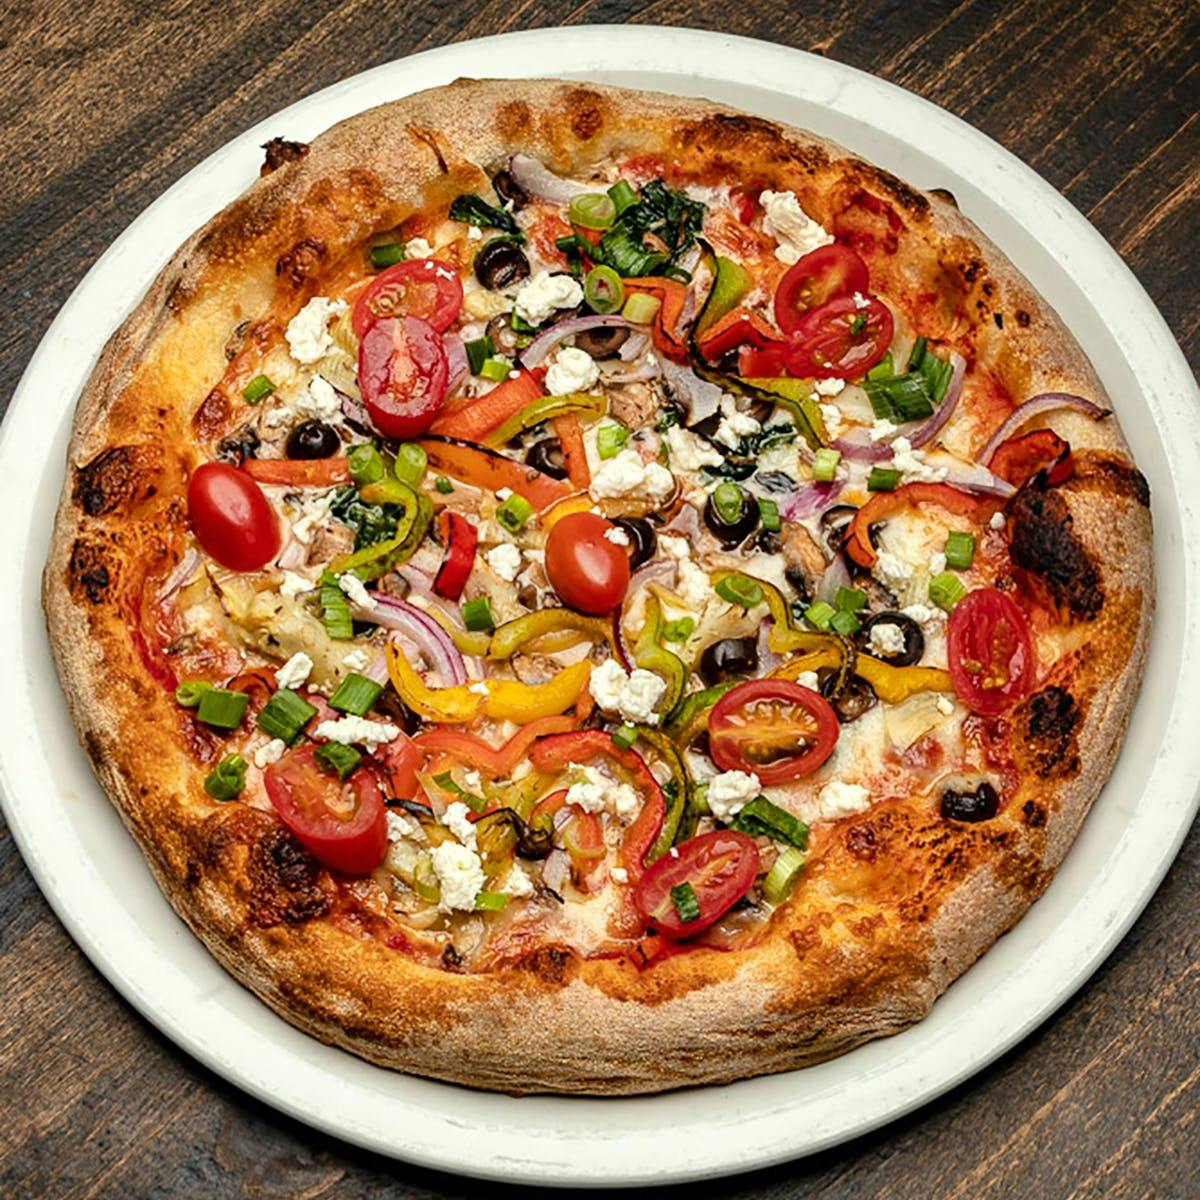 Vegetarian Pizza - Best Vegetarian Pizza Delivery Near Me